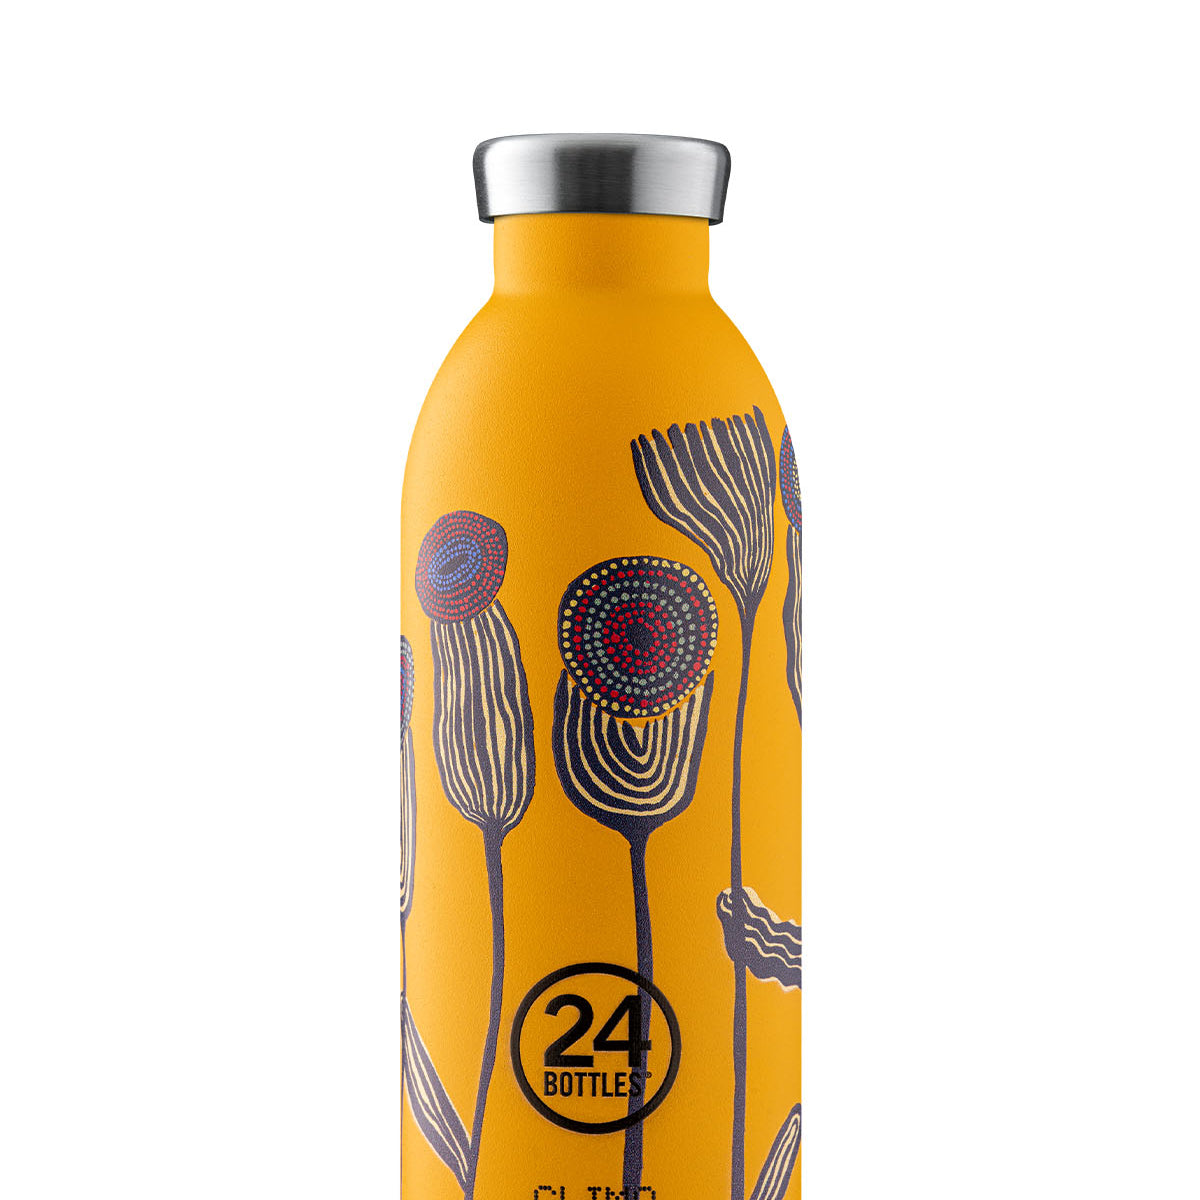  24BOTTLES Clima Bottles - Insulated Water Bottle  11oz/17oz/29oz, Water Bottles with 100% Leak Proof Lid (12 Hours Hot and 24  Hours Cold Beverages), Made of Stainless Steel, Italian Design : Home